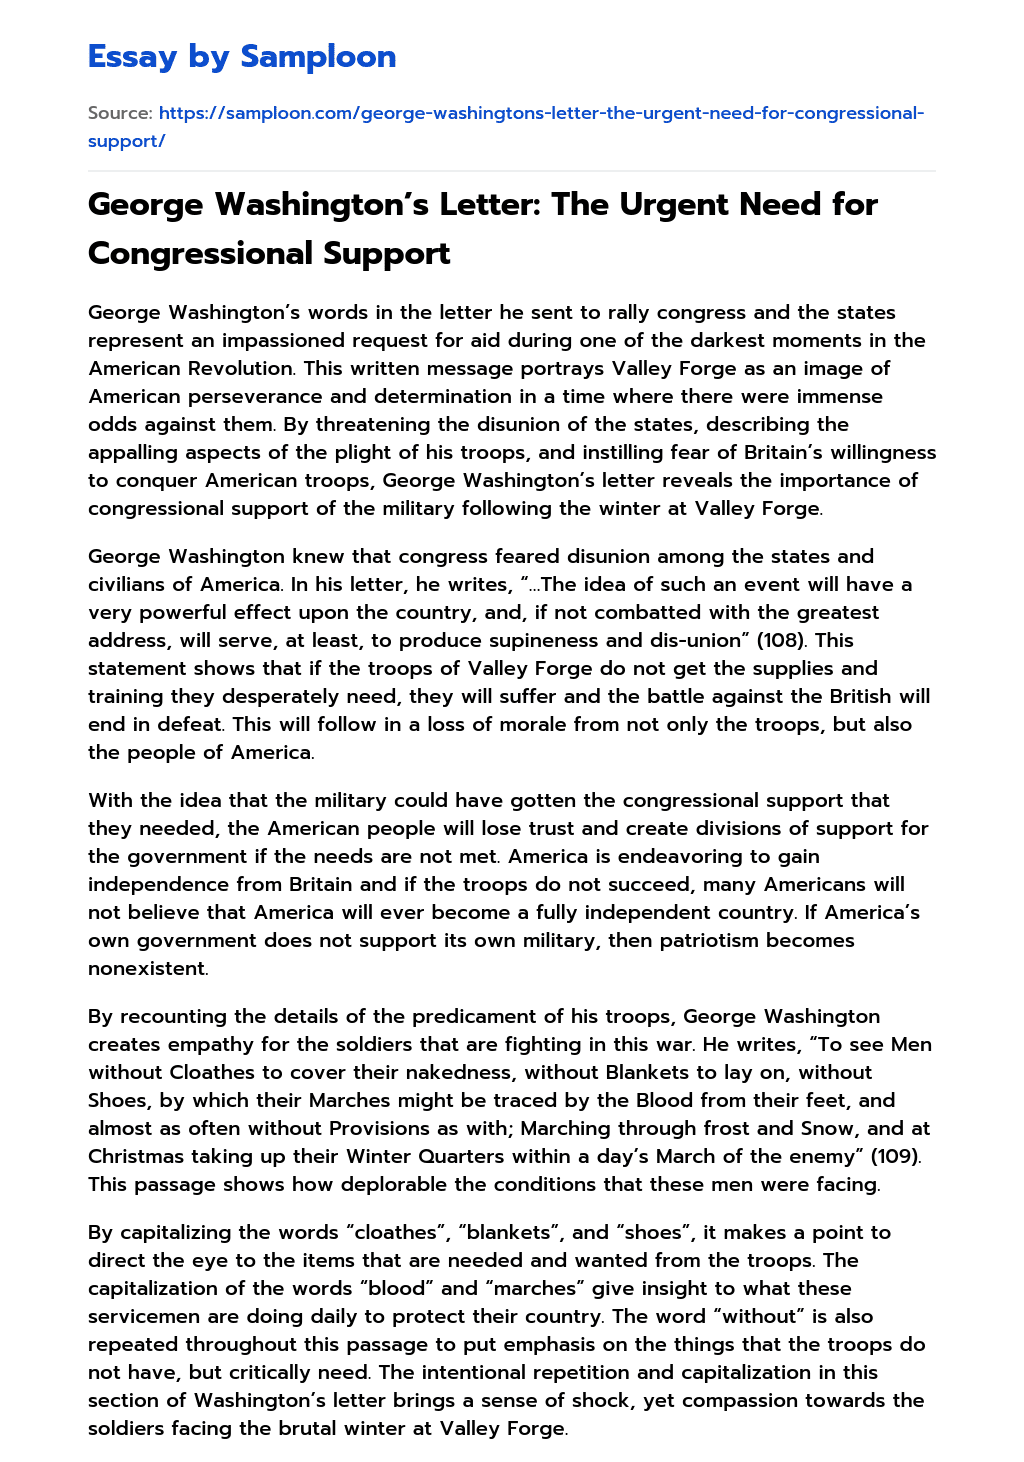 George Washington’s Letter: The Urgent Need for Congressional Support essay